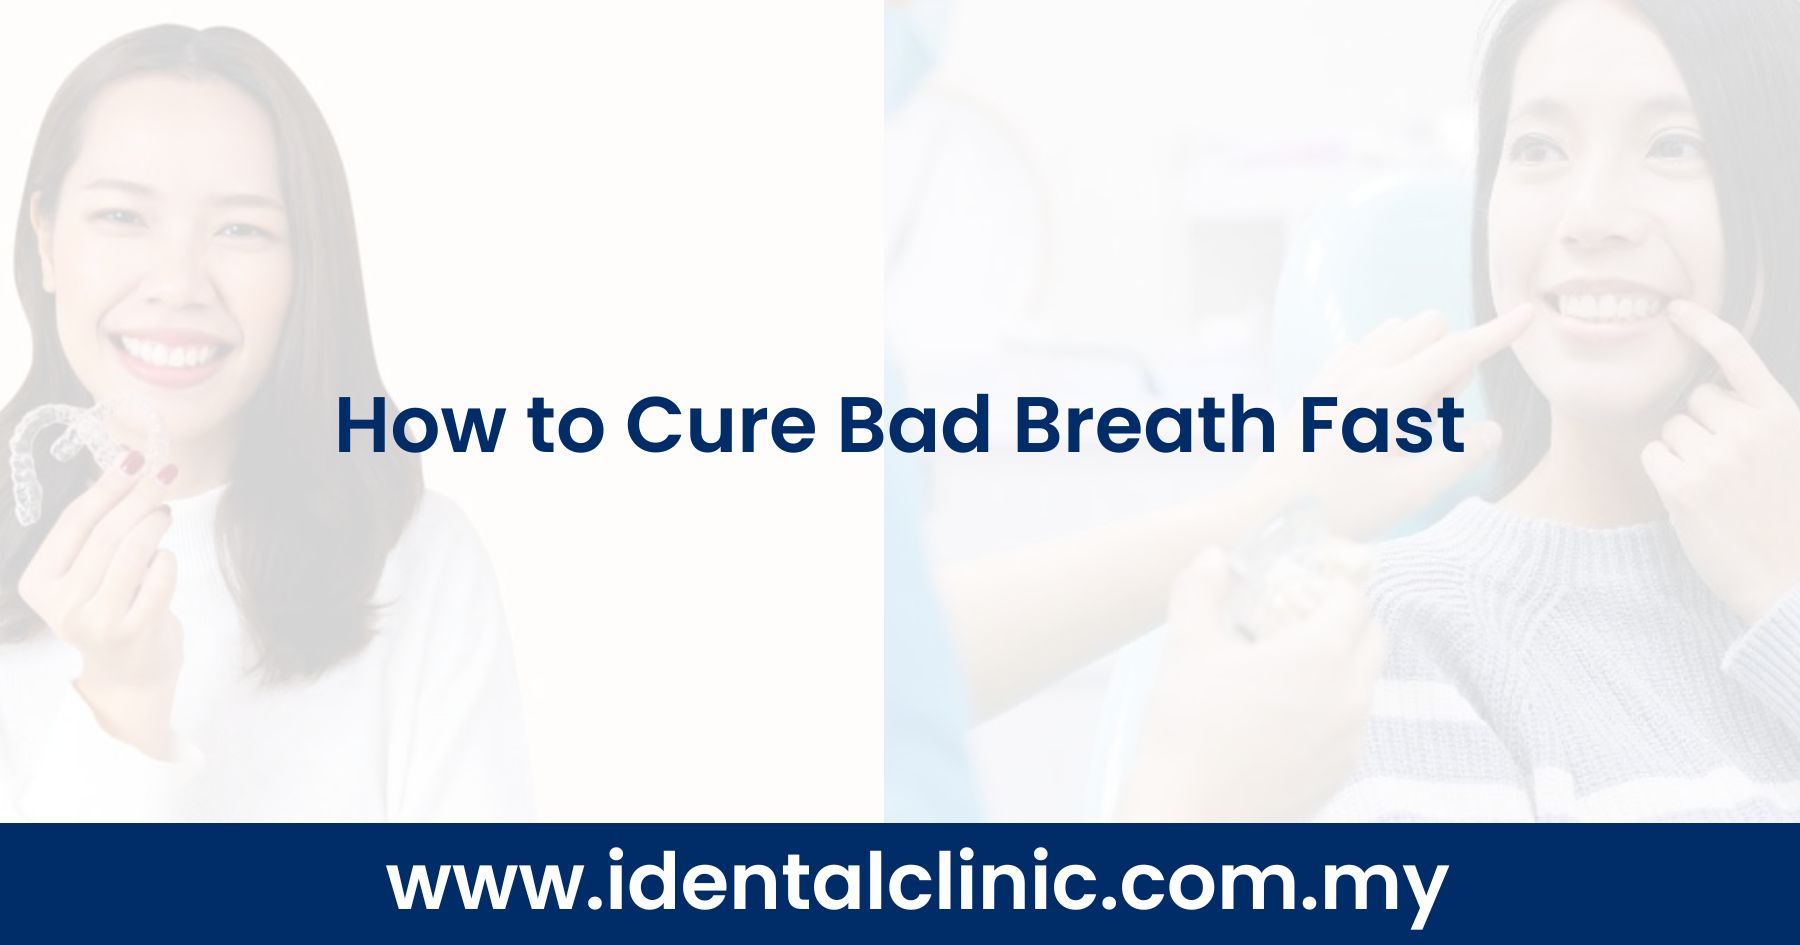 How to Cure Bad Breath Fast